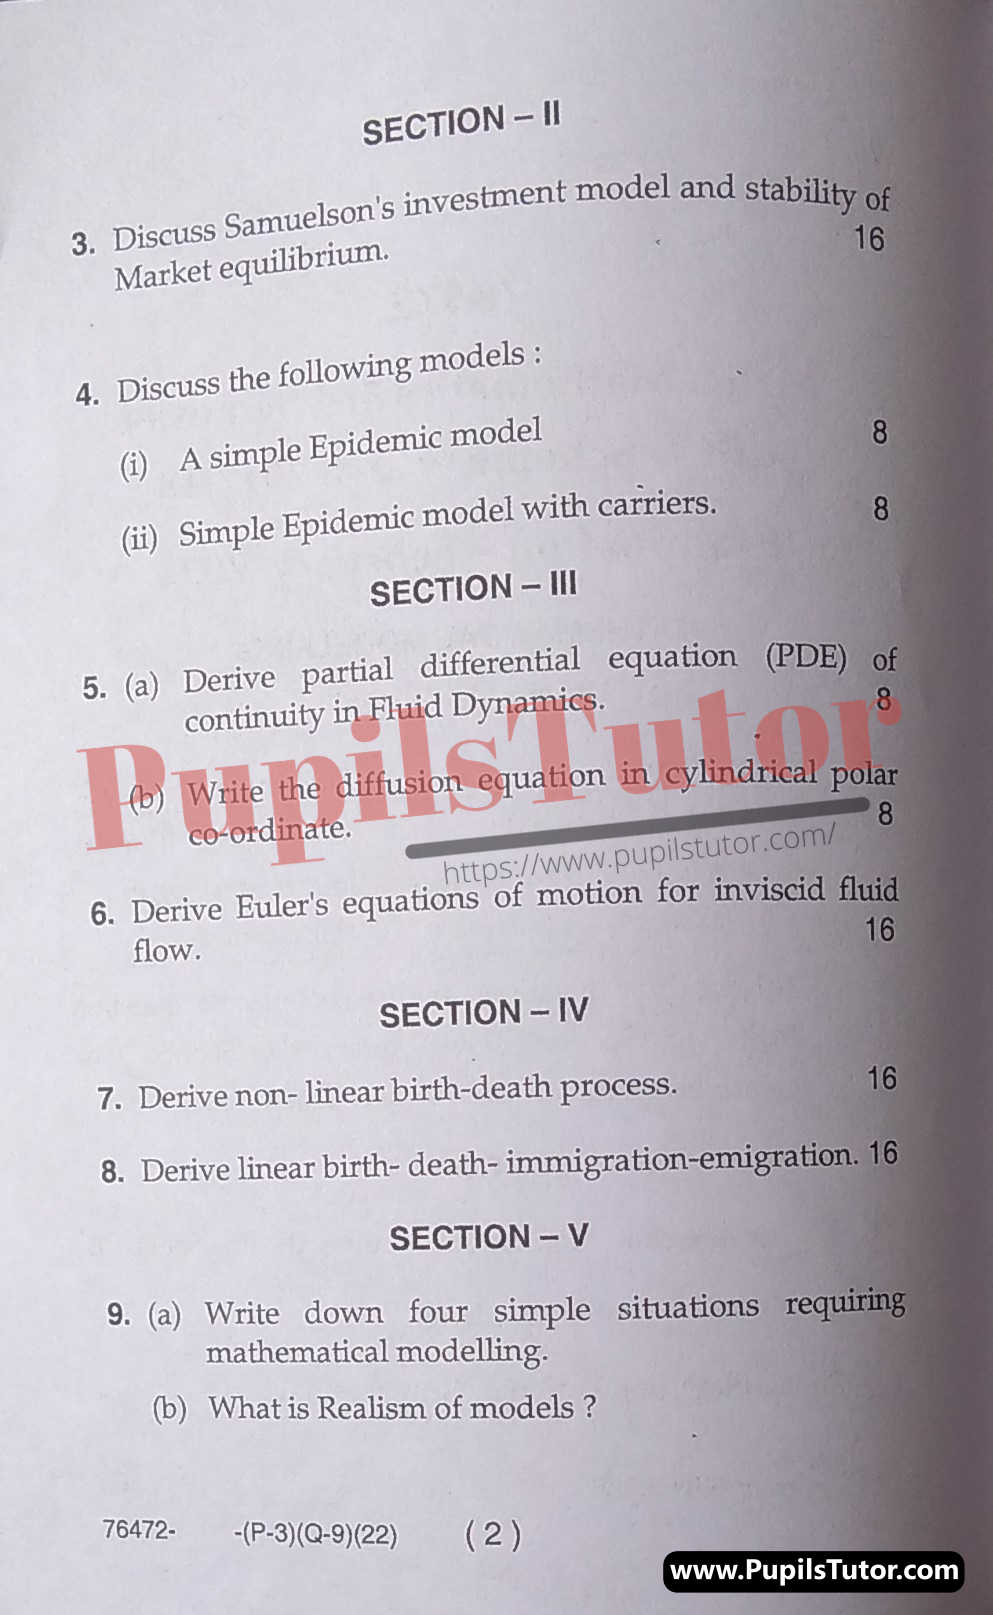 M.D. University M.Sc. [Mathematics] Mathematical Modelling Third Semester Important Question Answer And Solution - www.pupilstutor.com (Paper Page Number 2)